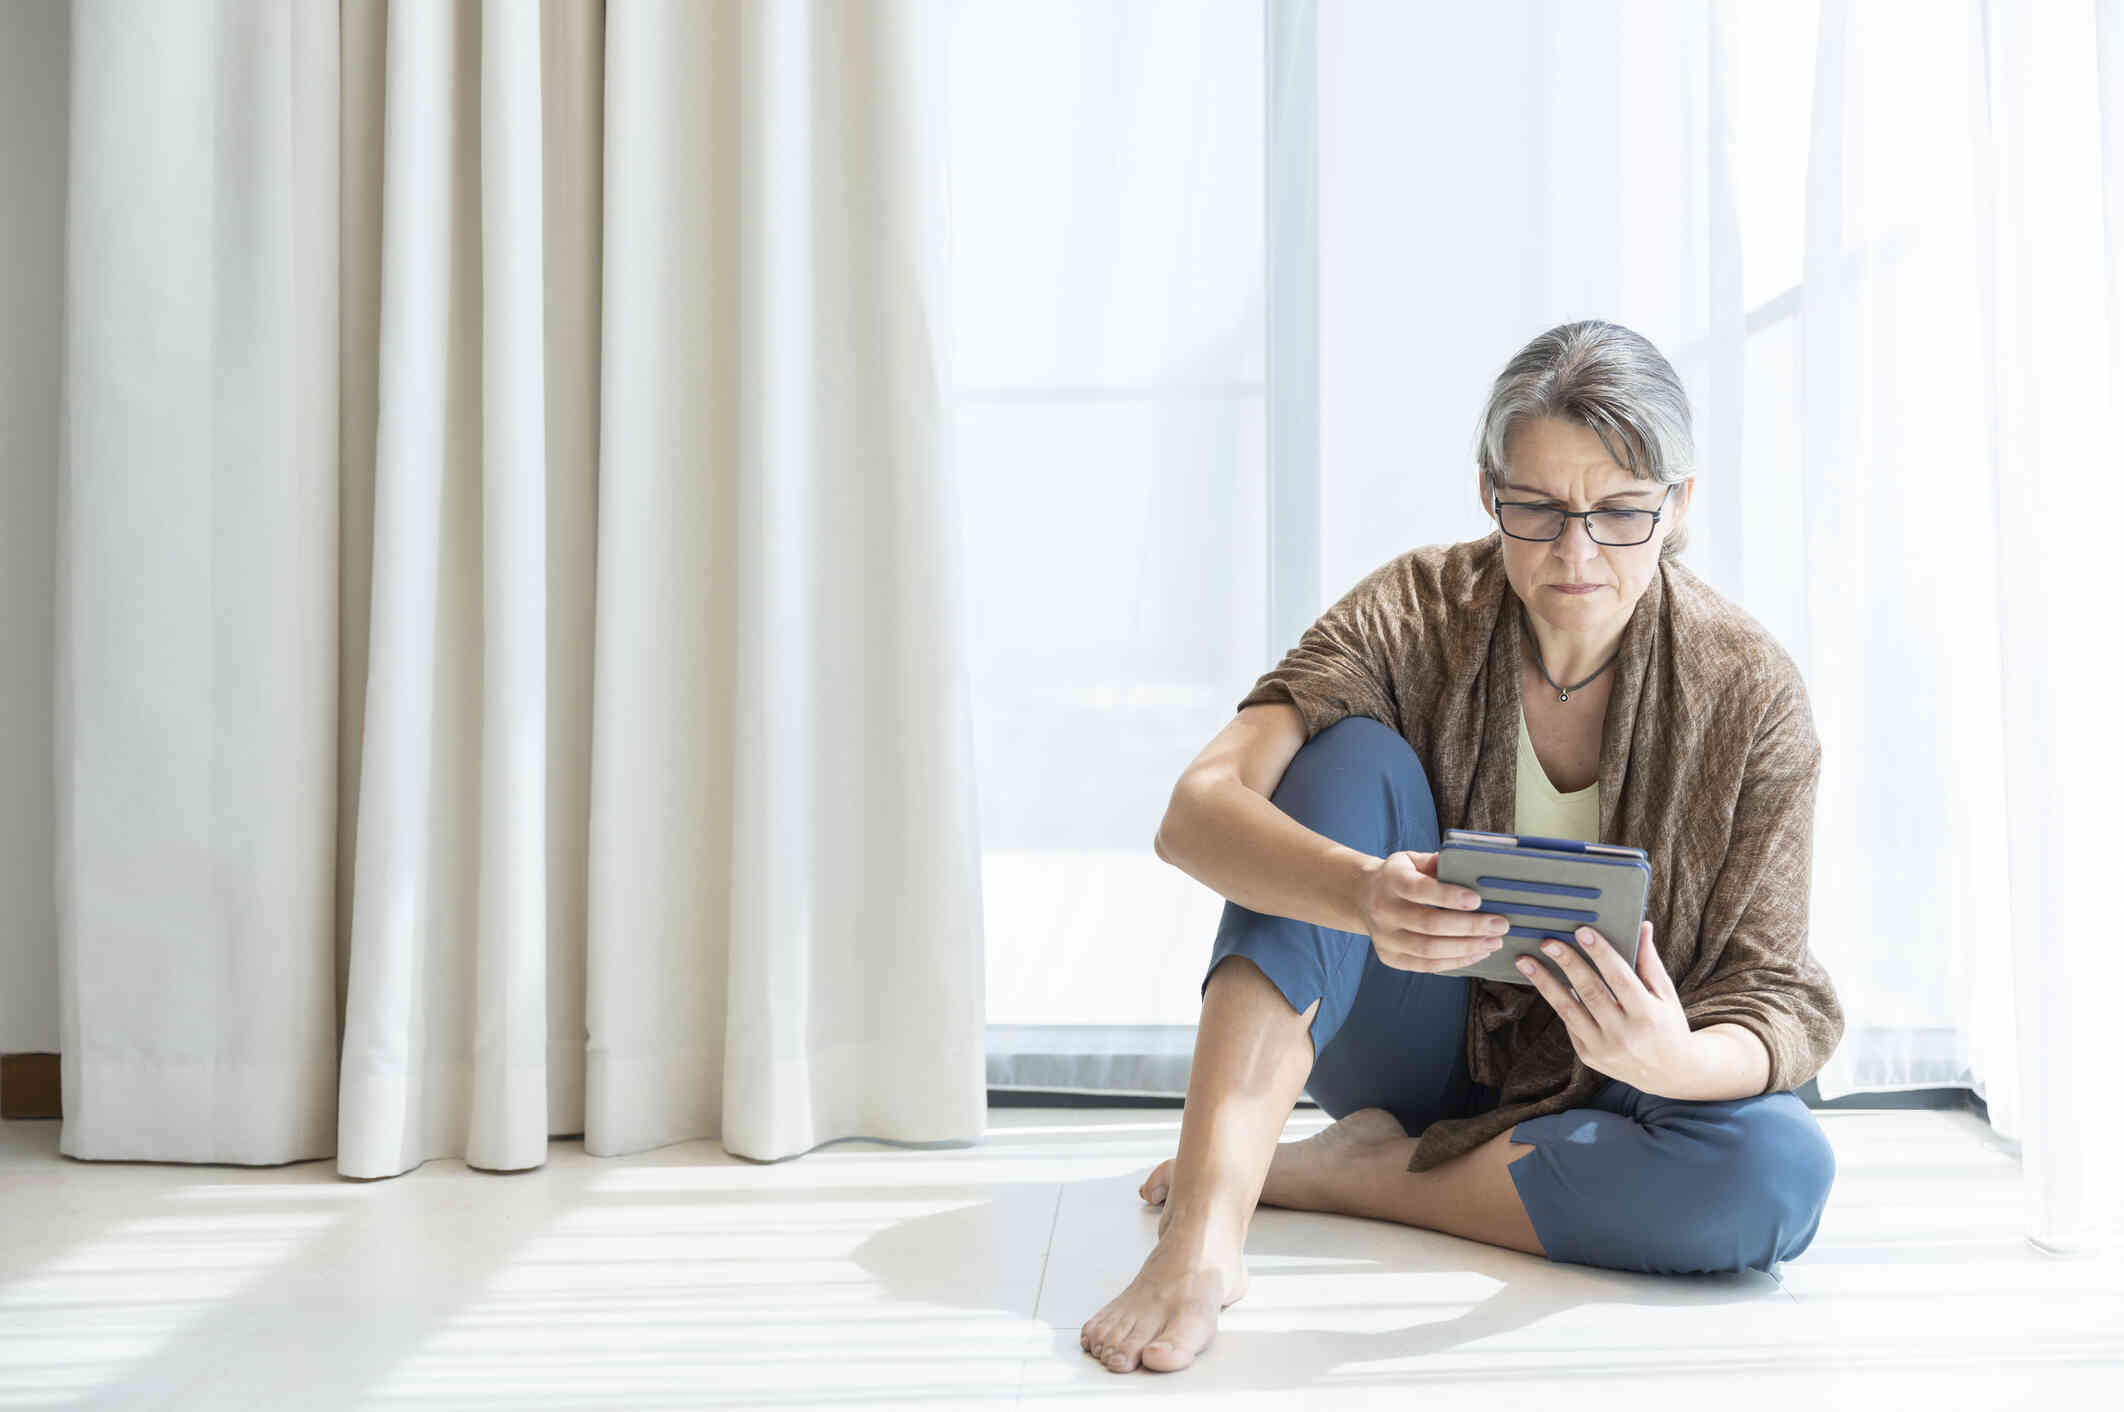 A middle aged woman with glasses sits on the floor in her home and looks at the tablet in her hands.